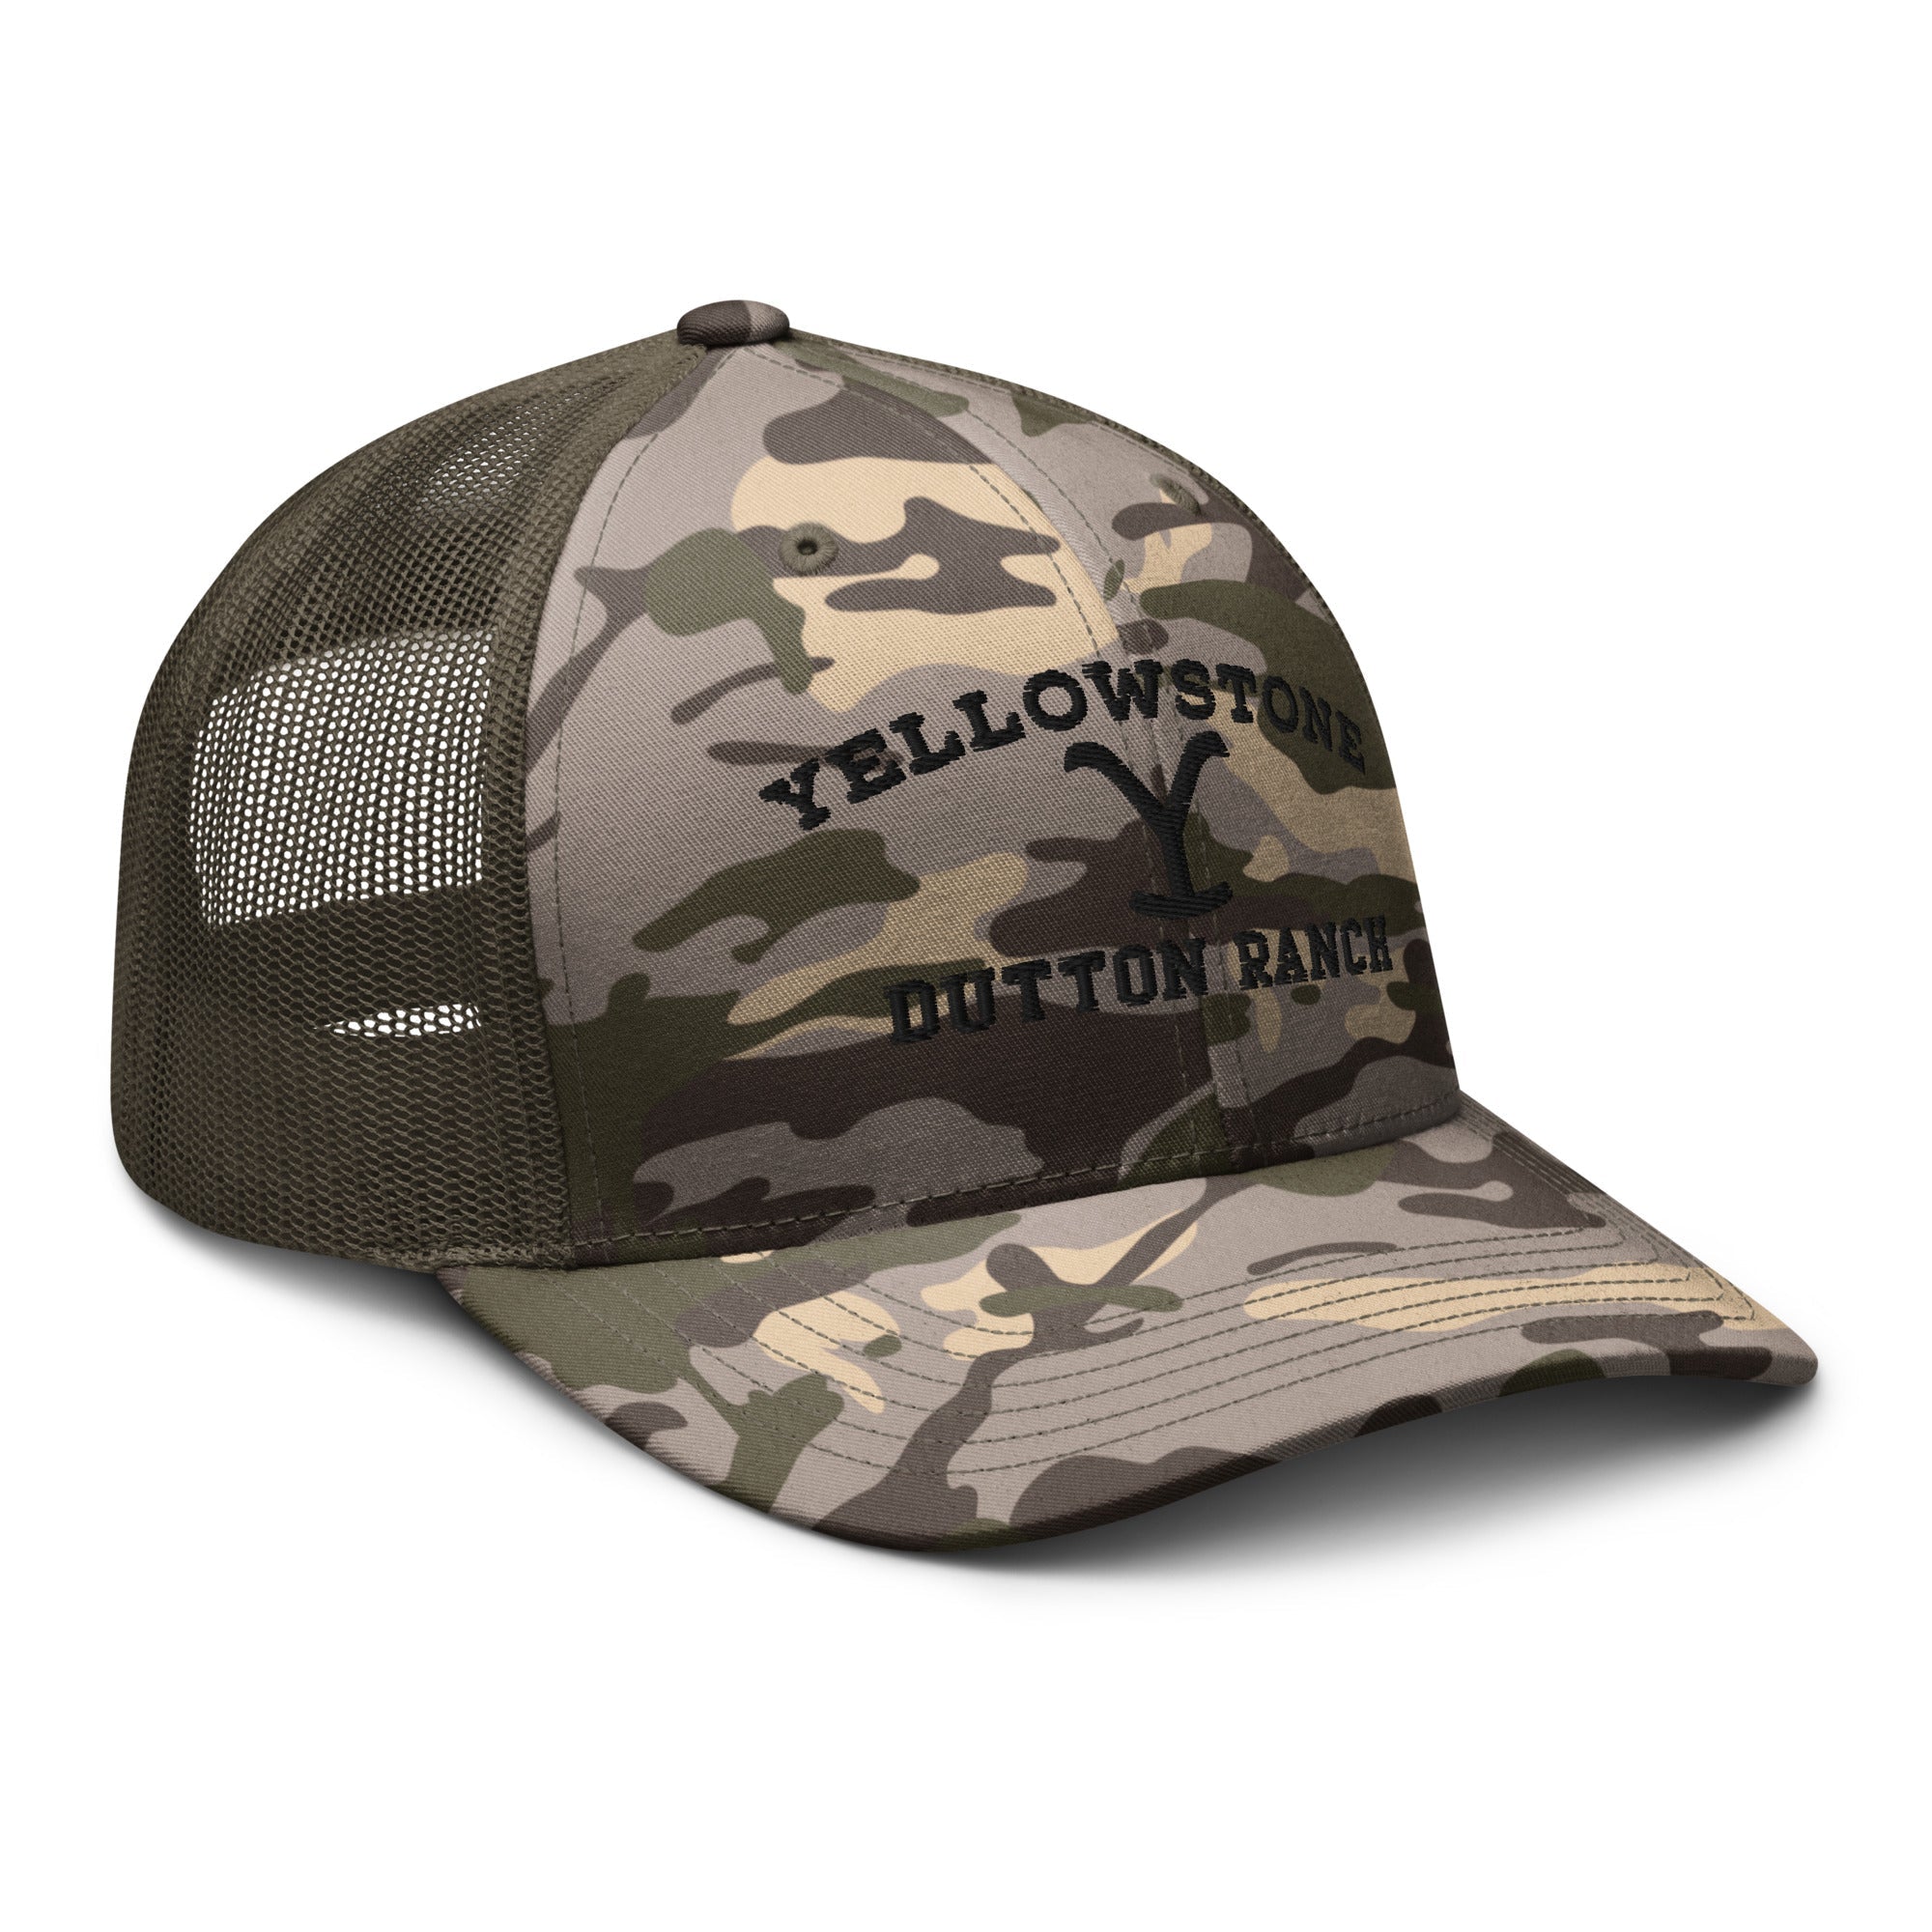 Yellowstone Dutton Ranch Camouflage Cap - choose color